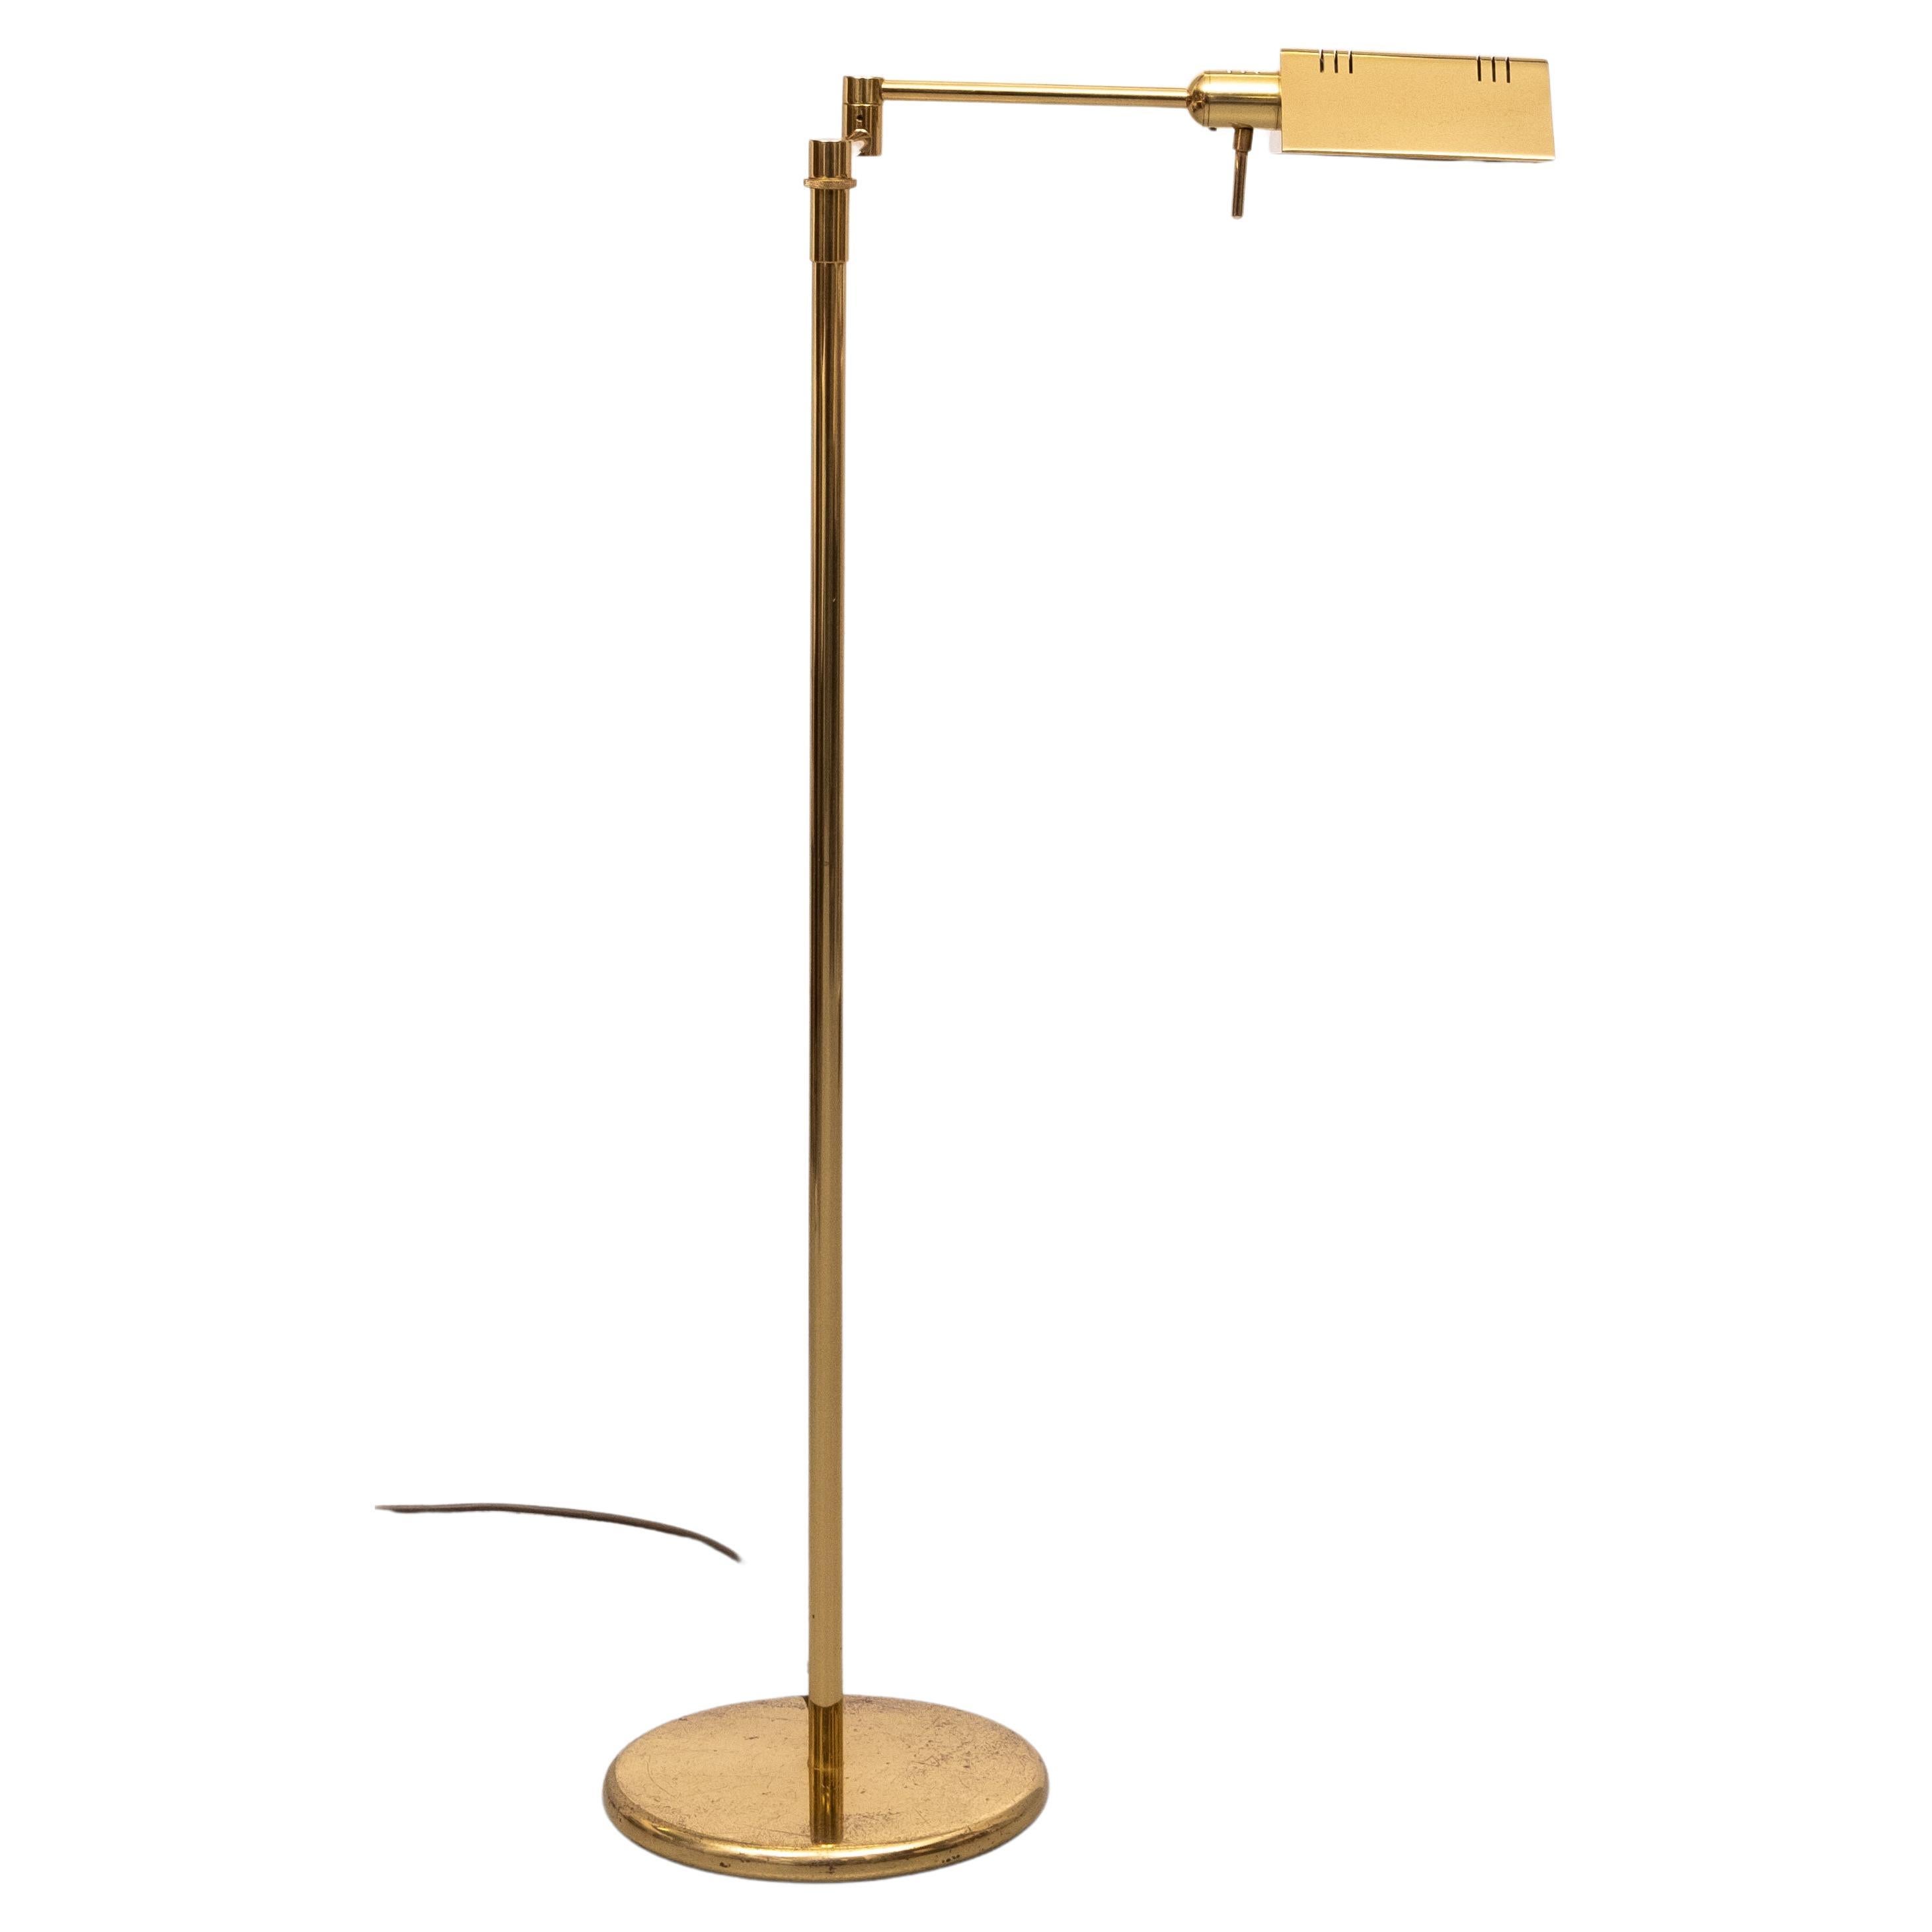 Beautiful Halogen Brass floor lamp .  Adjustable in height . 
Comes with a new and good working Dimmer ''see Video'' Ideal reading light .Good condition ,only the base shows users marks . Top quality lamp.